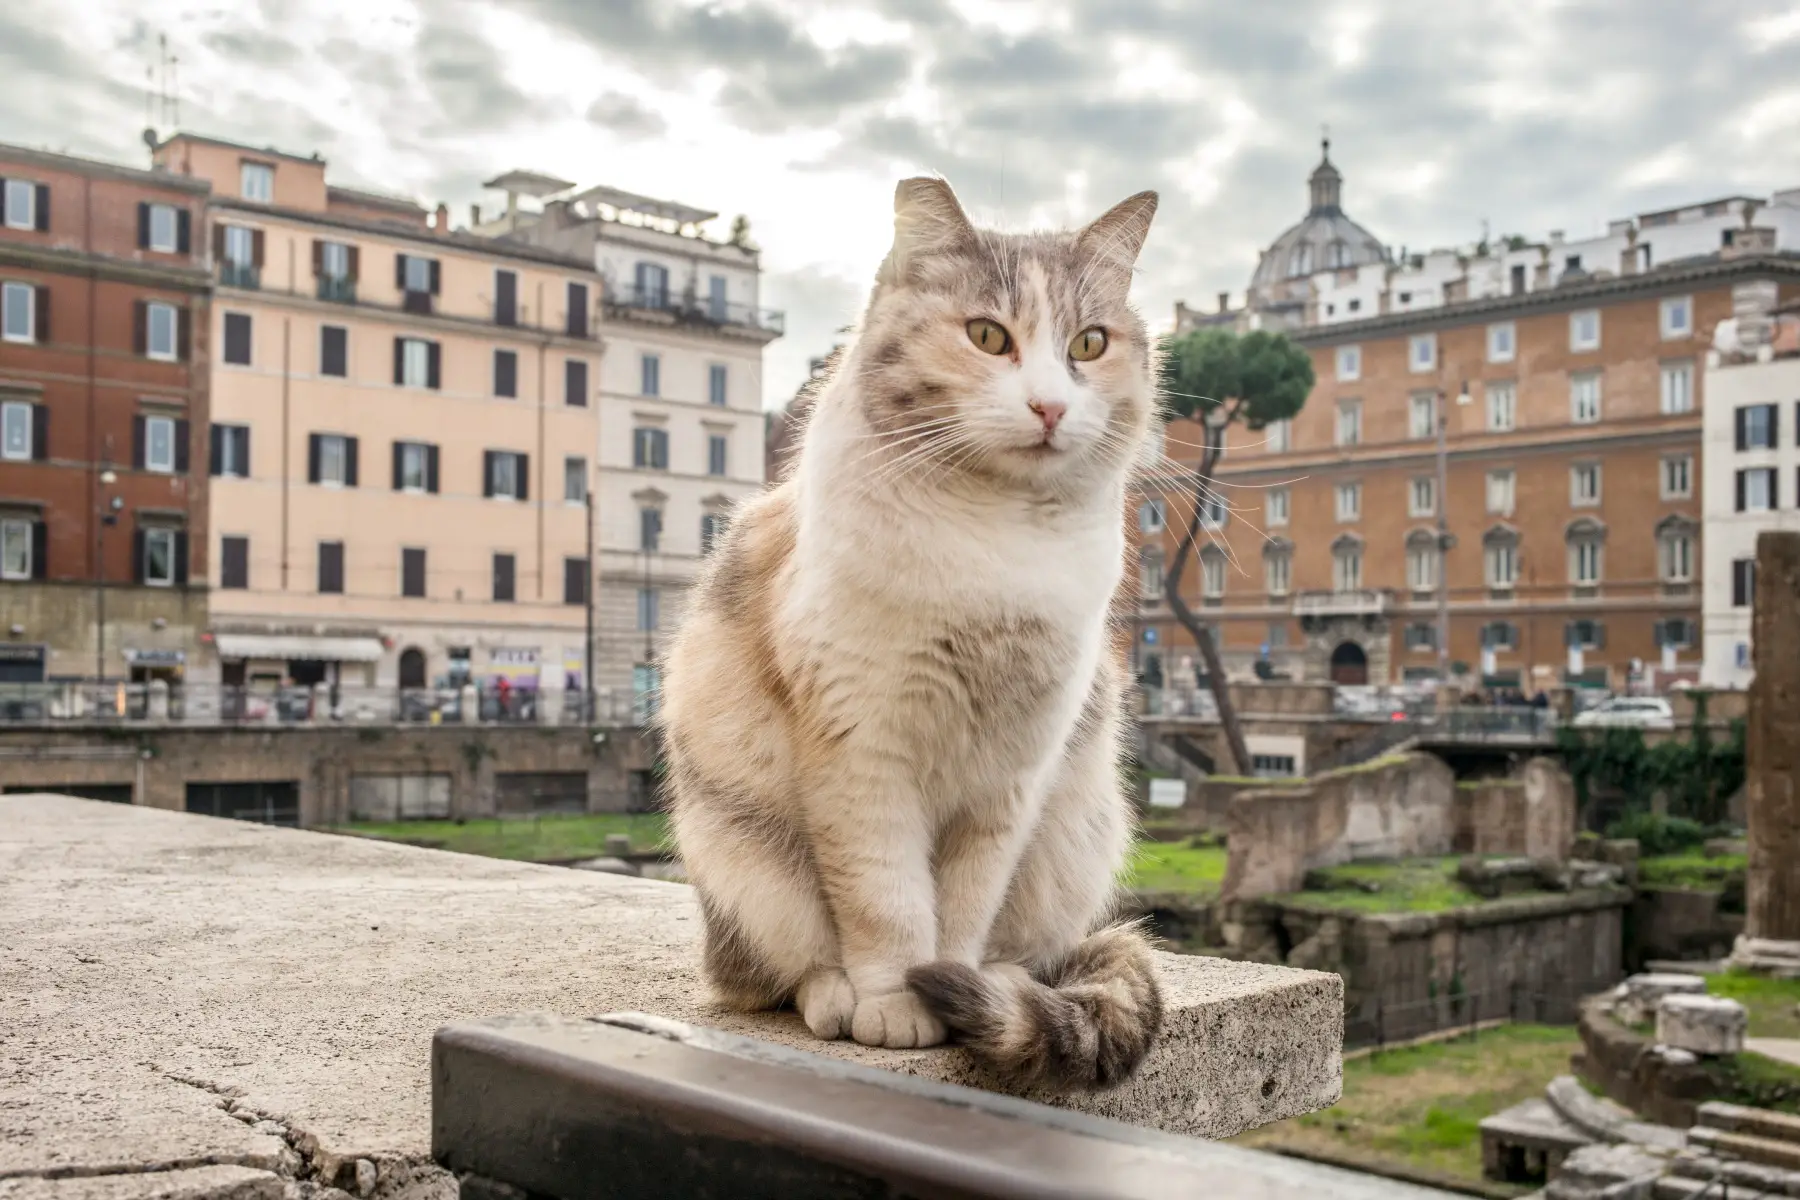 A wild cat sitting on the ruins of Largo di Torre Argentina in central Rome